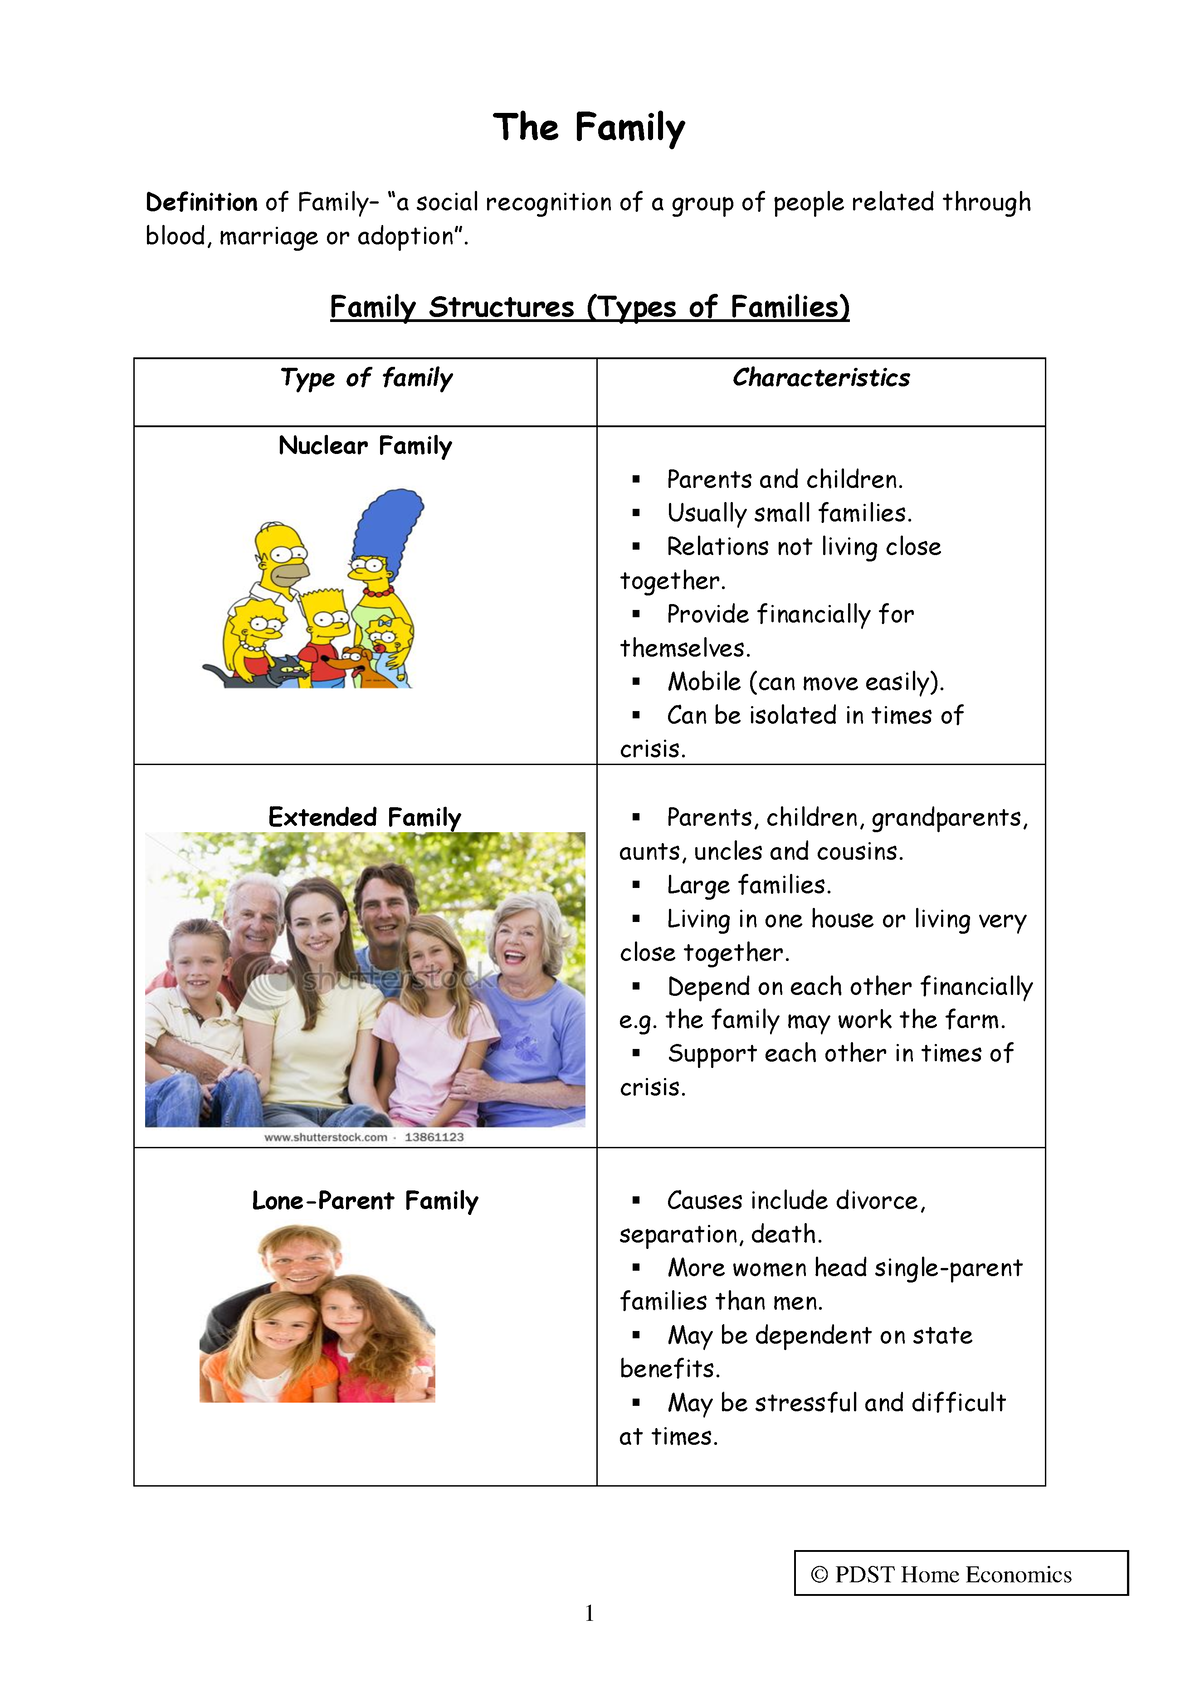 family-structures-updated-2022-1-the-family-definition-of-family-a